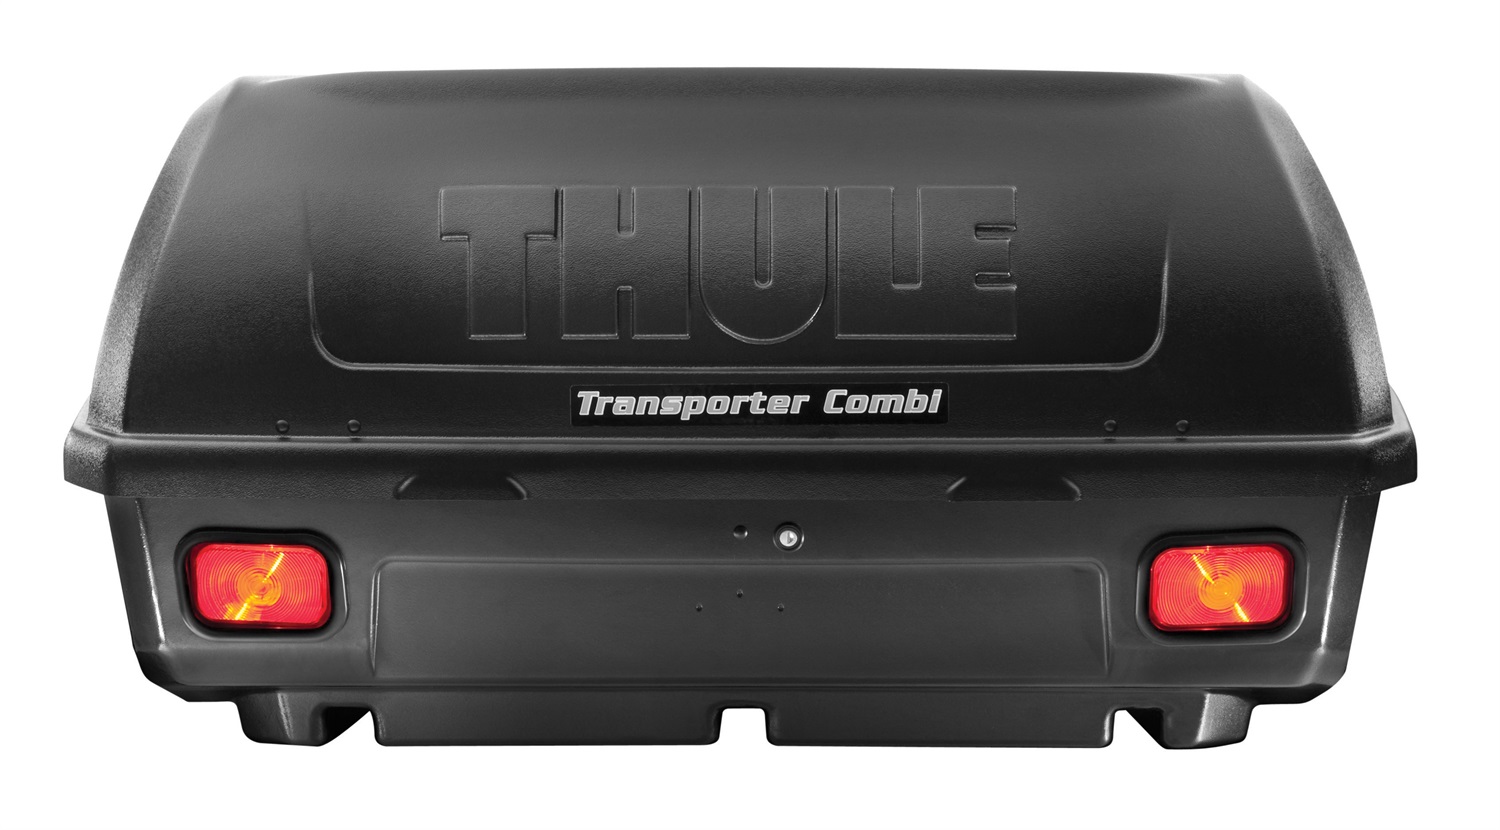 Thule Thule 665C Transporter Combi Hitch Mounted Cargo Carrier